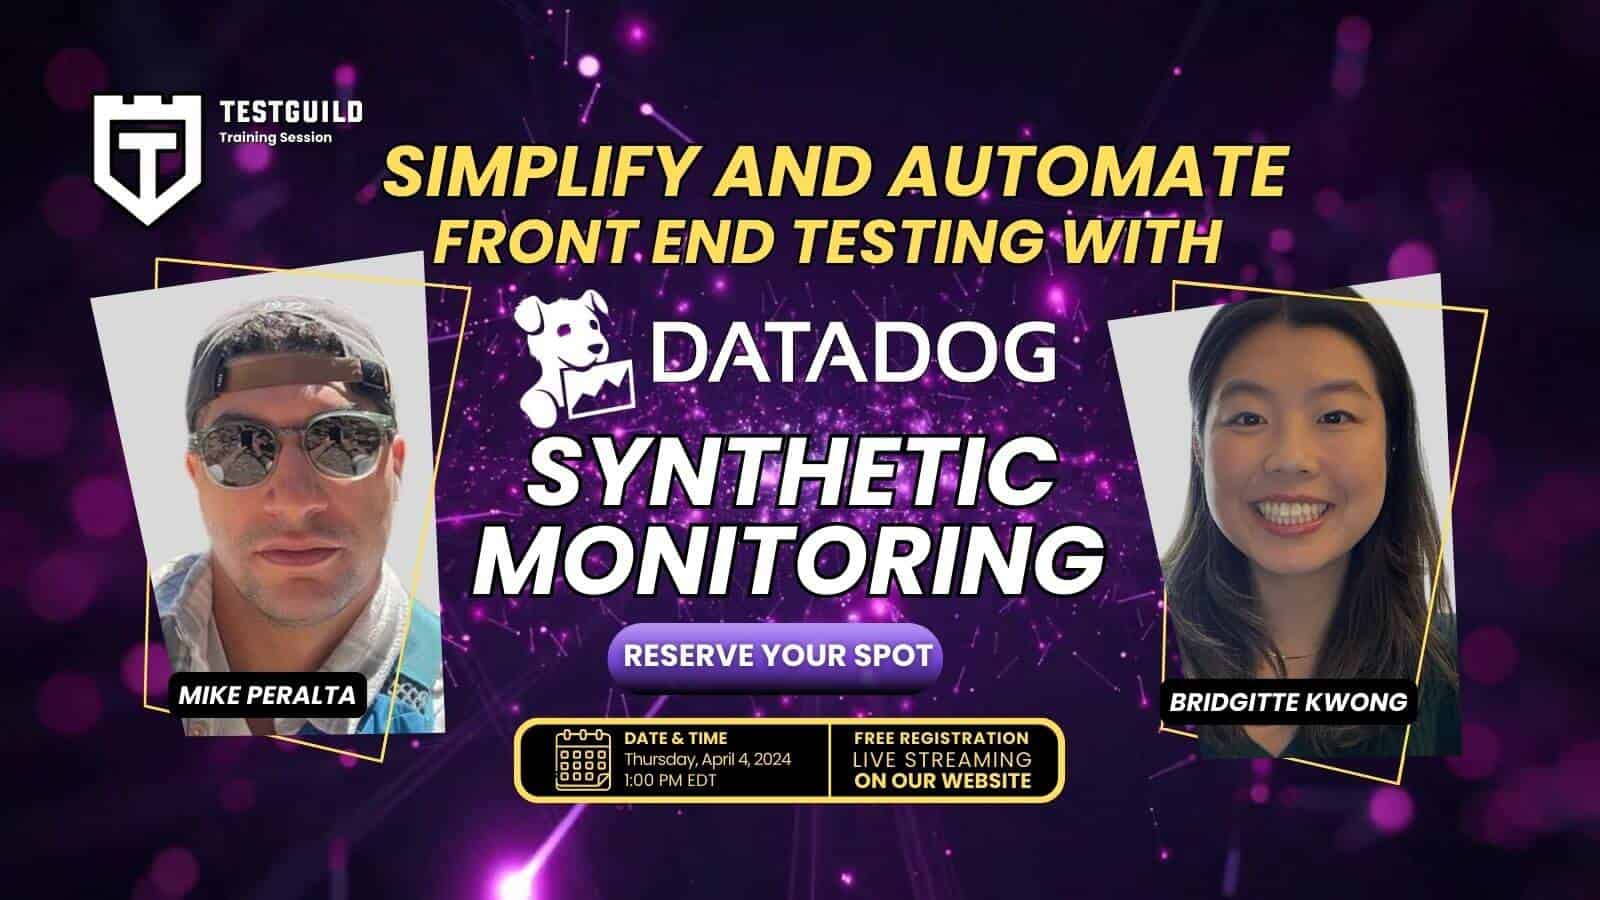 Webinar promotion for 'simplify and automate front-end testing with datadog synthetic monitoring' featuring speakers mike peralta and briddgitte kwong, scheduled for april 14, 2021.